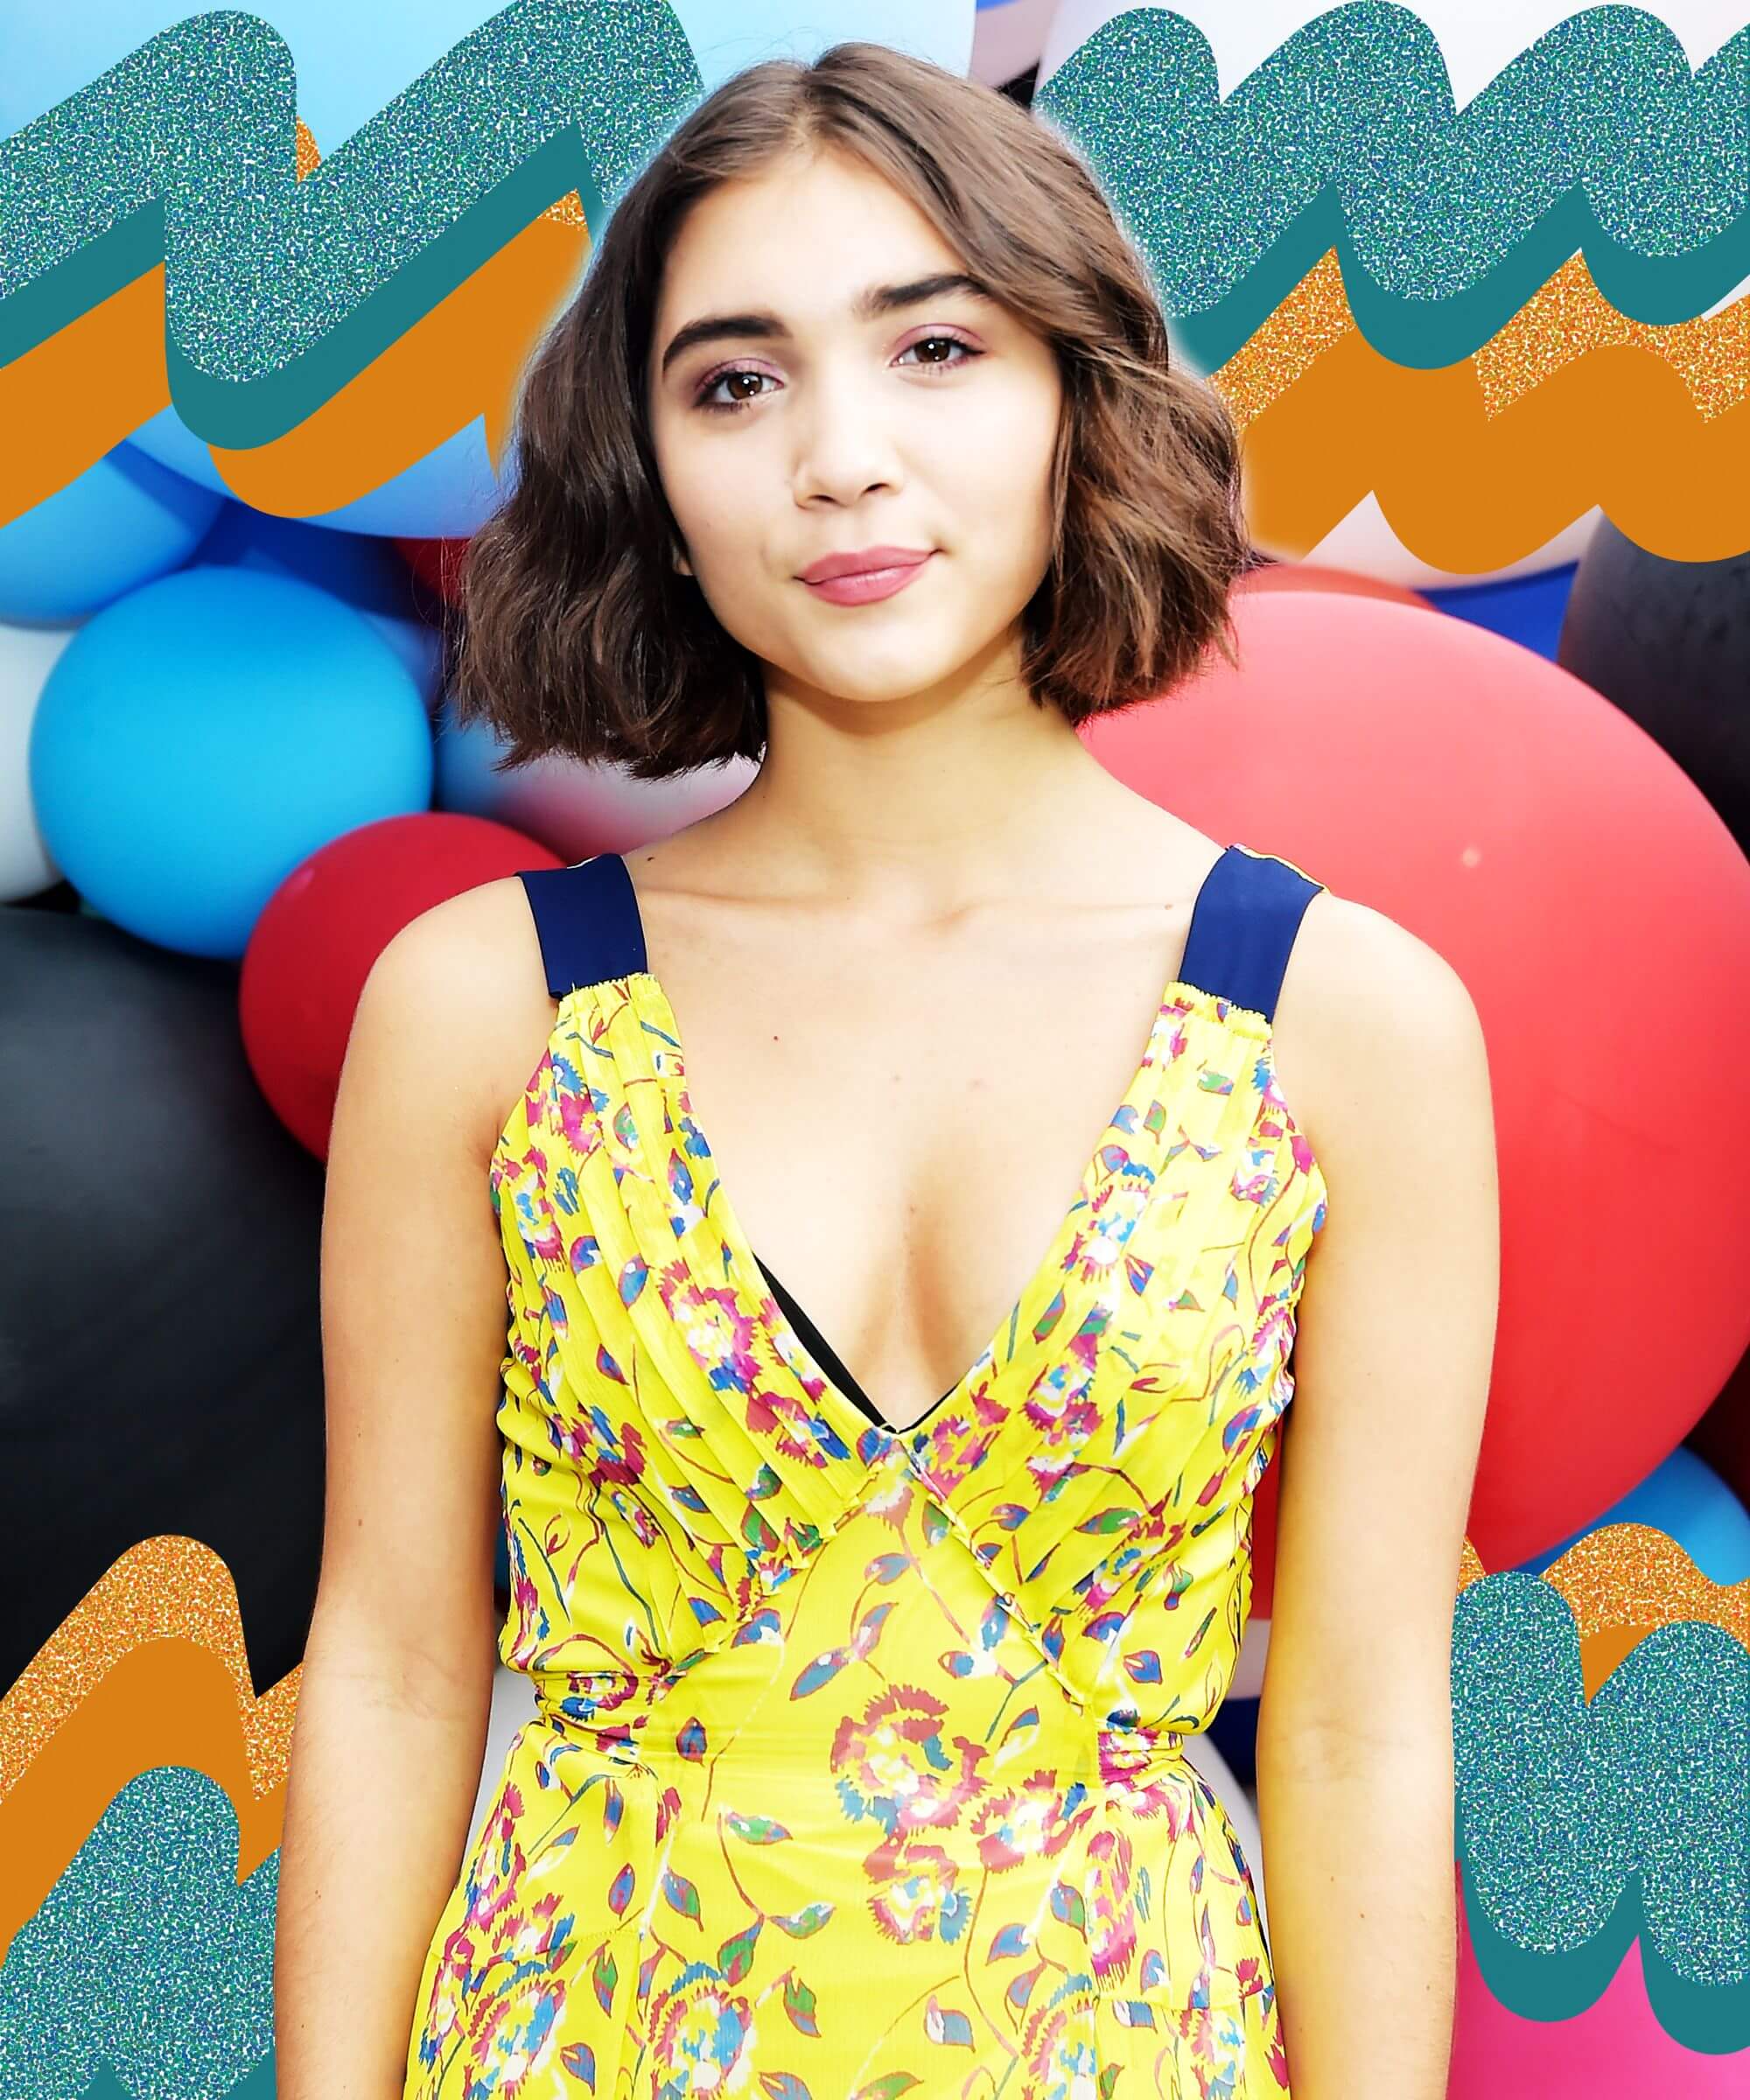 51 Rowan Blanchard Nude Pictures Will Drive You Frantically Enamored